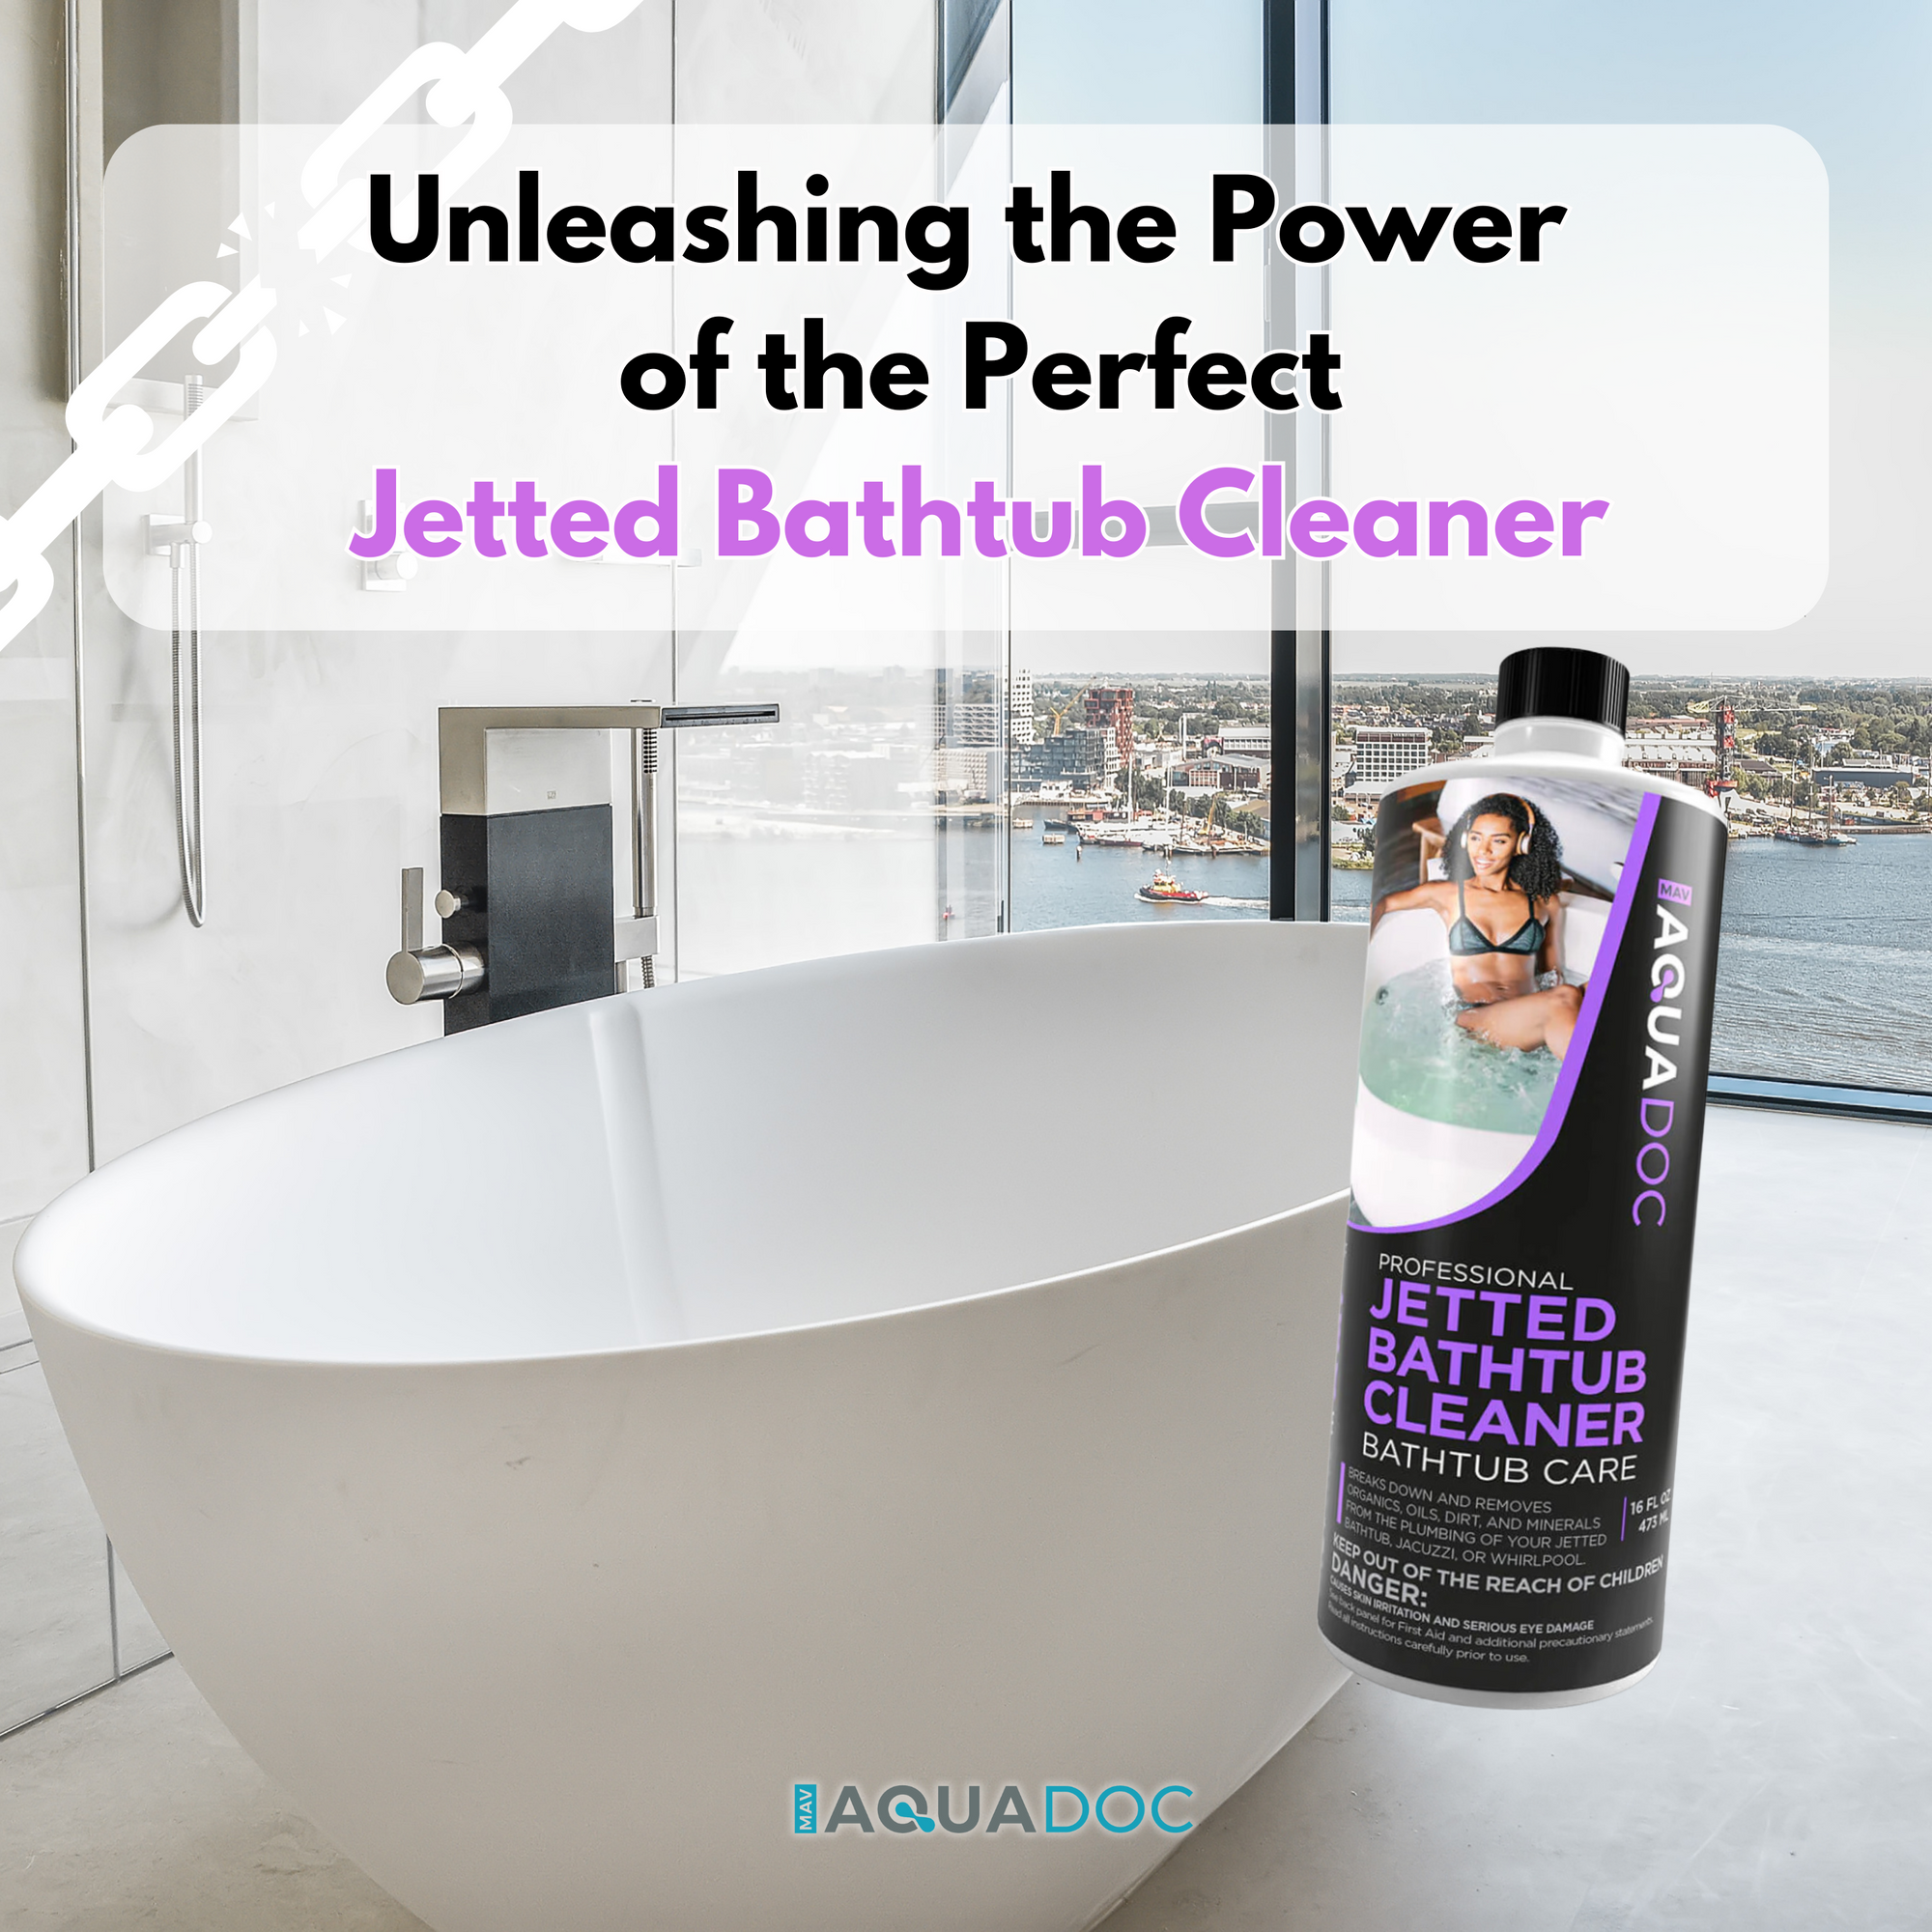 Aim for a monthly deep clean and a quick jet flush after each bath. Bonus points for installing a jetted tub filter